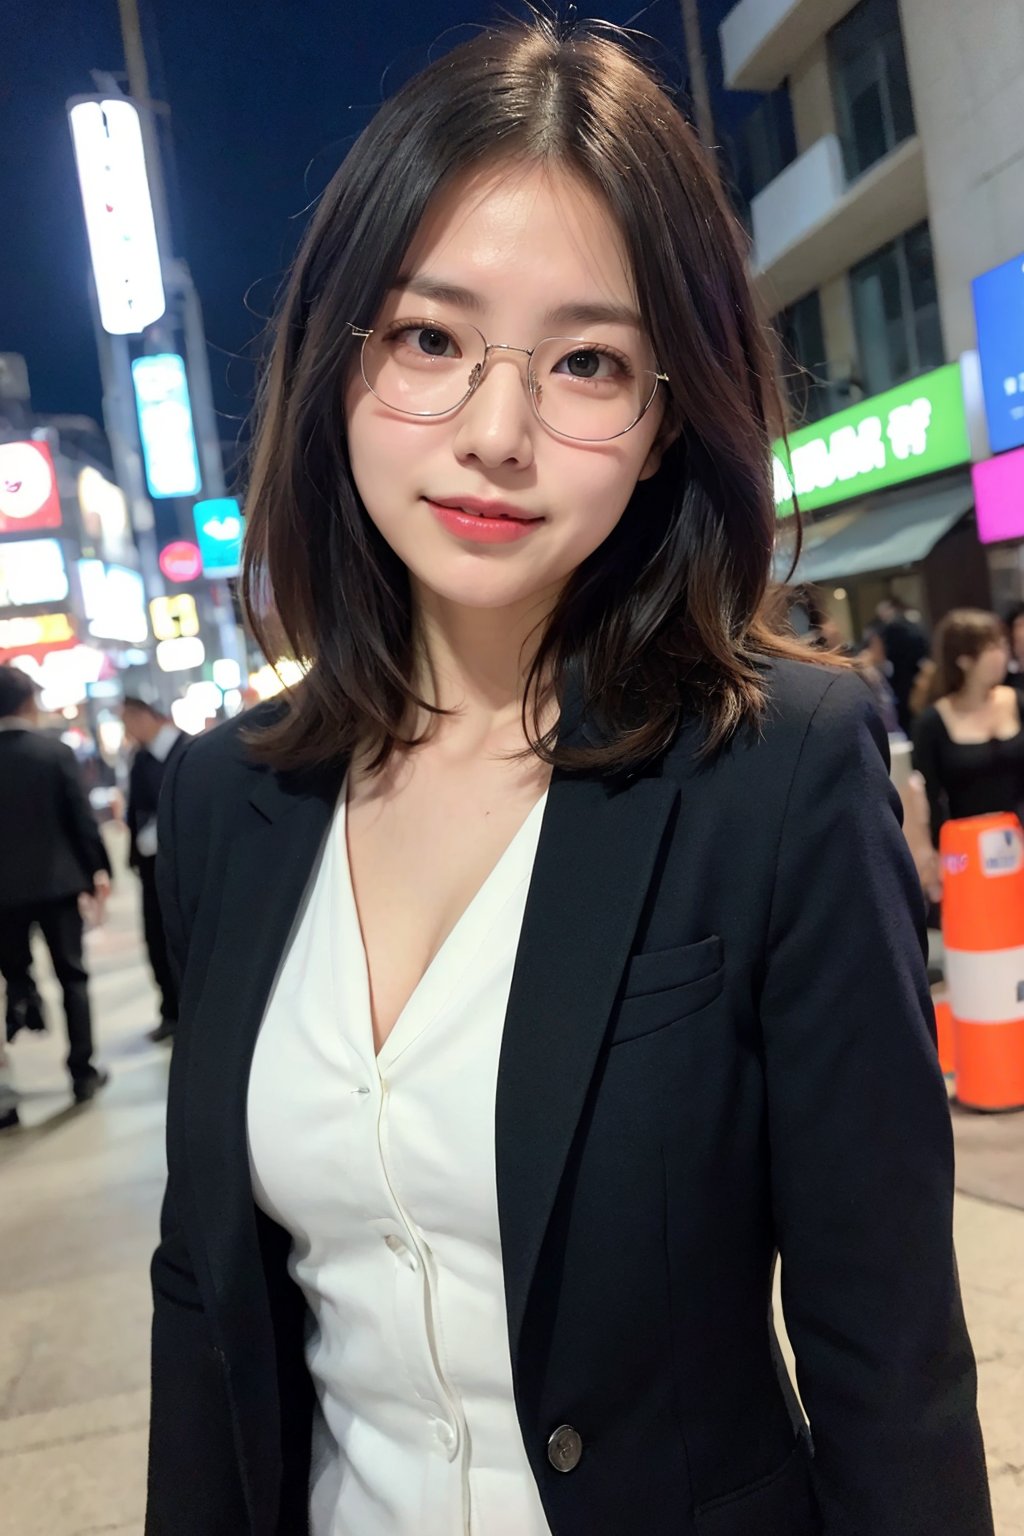 best quality, masterpiece, ultra high resolution, (photorealistic:1.2),mature female, 40 years old,( semi-rimless eyewear,:1.3)BREAKbrown_eyes, black_hair, (short hair:1.2), (forehead:1.5),(small breasts, wide hips, large thighs,:1.2)light smile,BREAKShe is wearing (a black tailored jacket :1.4), (a white shirt:1.4), (black suit style:1.4),BREAK(She is standing on osaka night street:1.4)."A woman in a suit smiling and saying 'good evening' on a busy city street at night. The scene includes bright streetlights, neon signs, silhouettes of skyscrapers, and a bustling urban atmosphere with cafes and restaurants, emphasizing her professional look and serene expression."( focus face,upper body,:1.5)(closeup shot:1.5)(RAW photo:1.3)